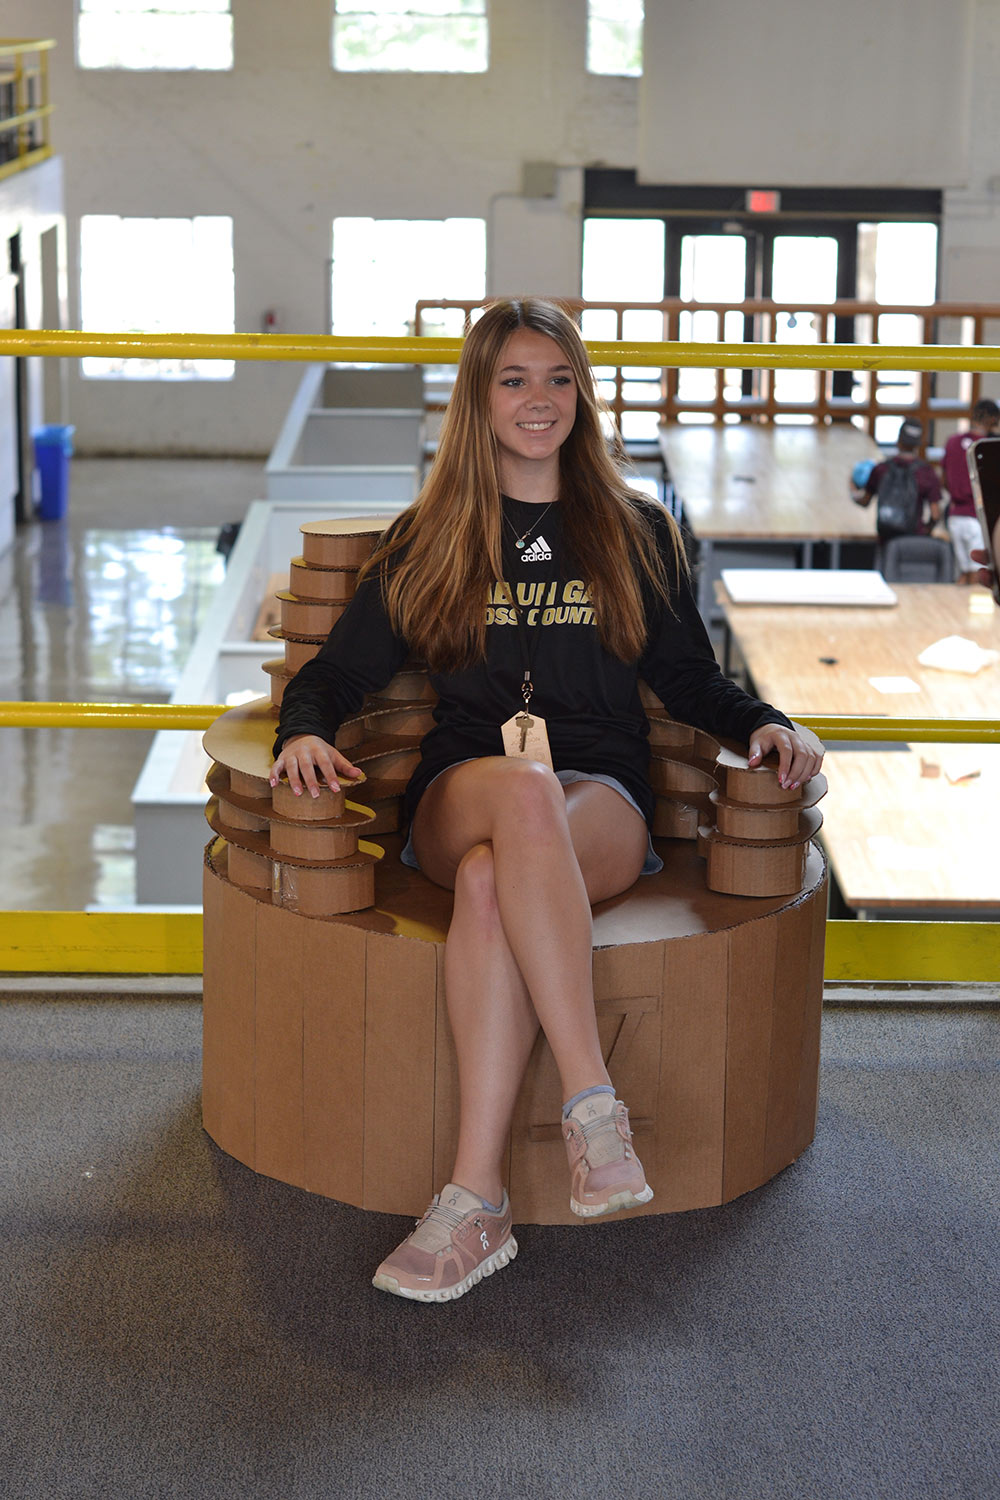 Design Discovery camper sits on her cardboard chair project.